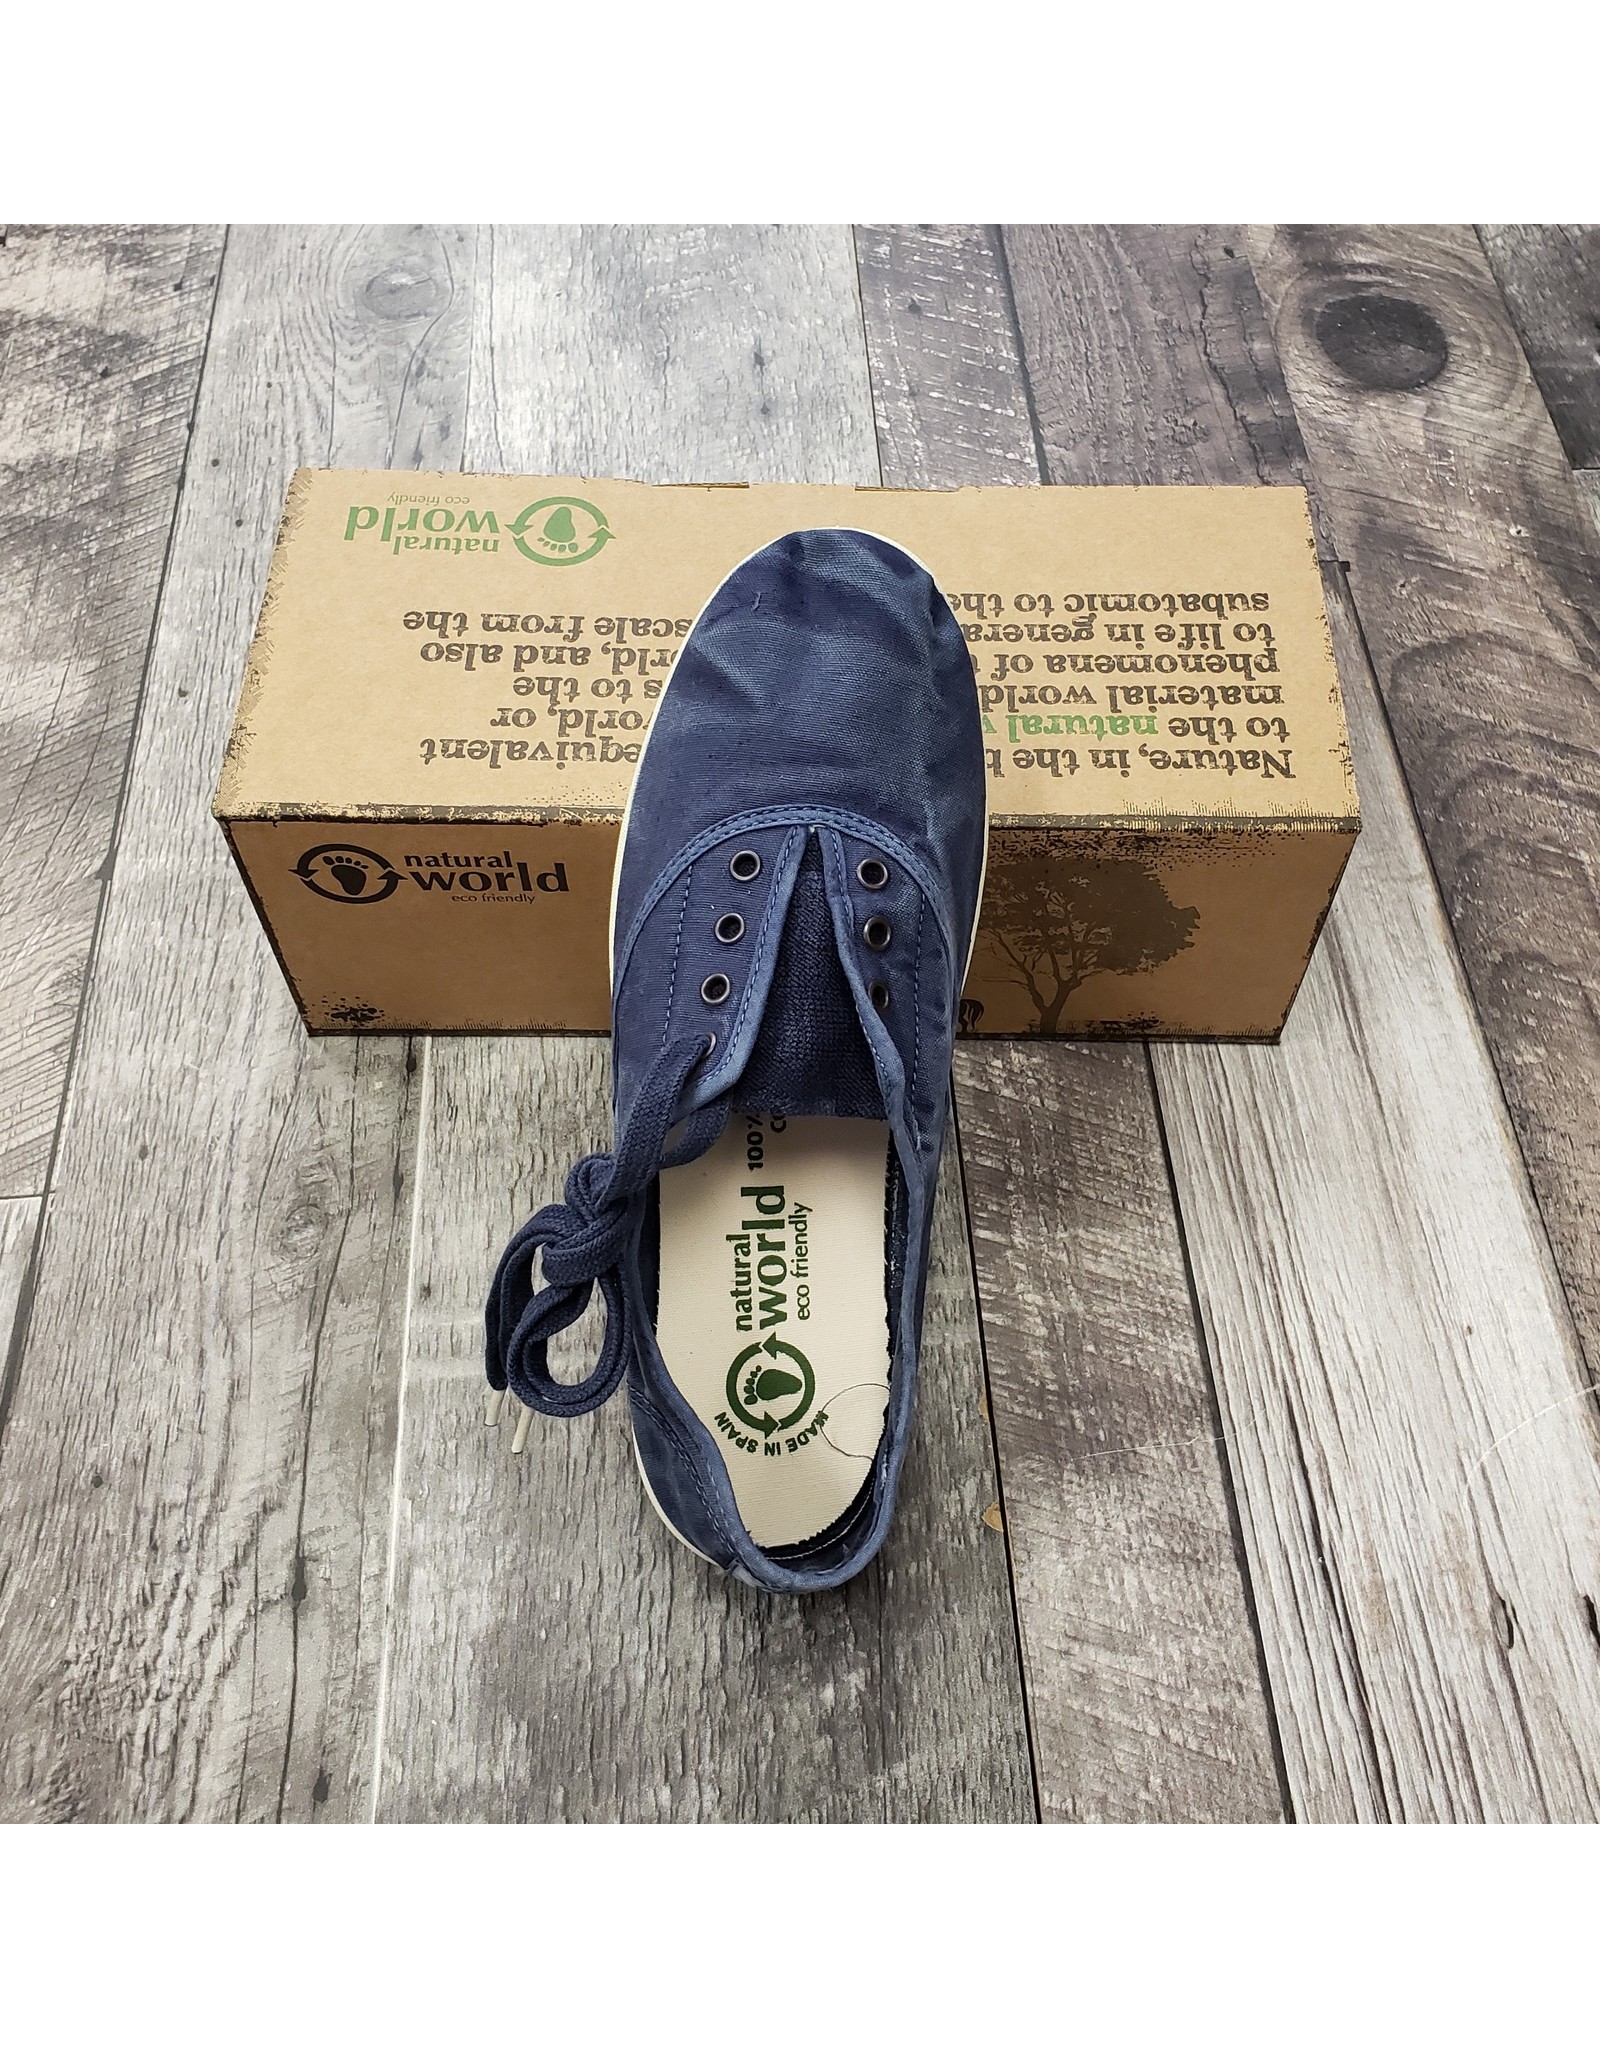 natural world eco friendly shoes spain